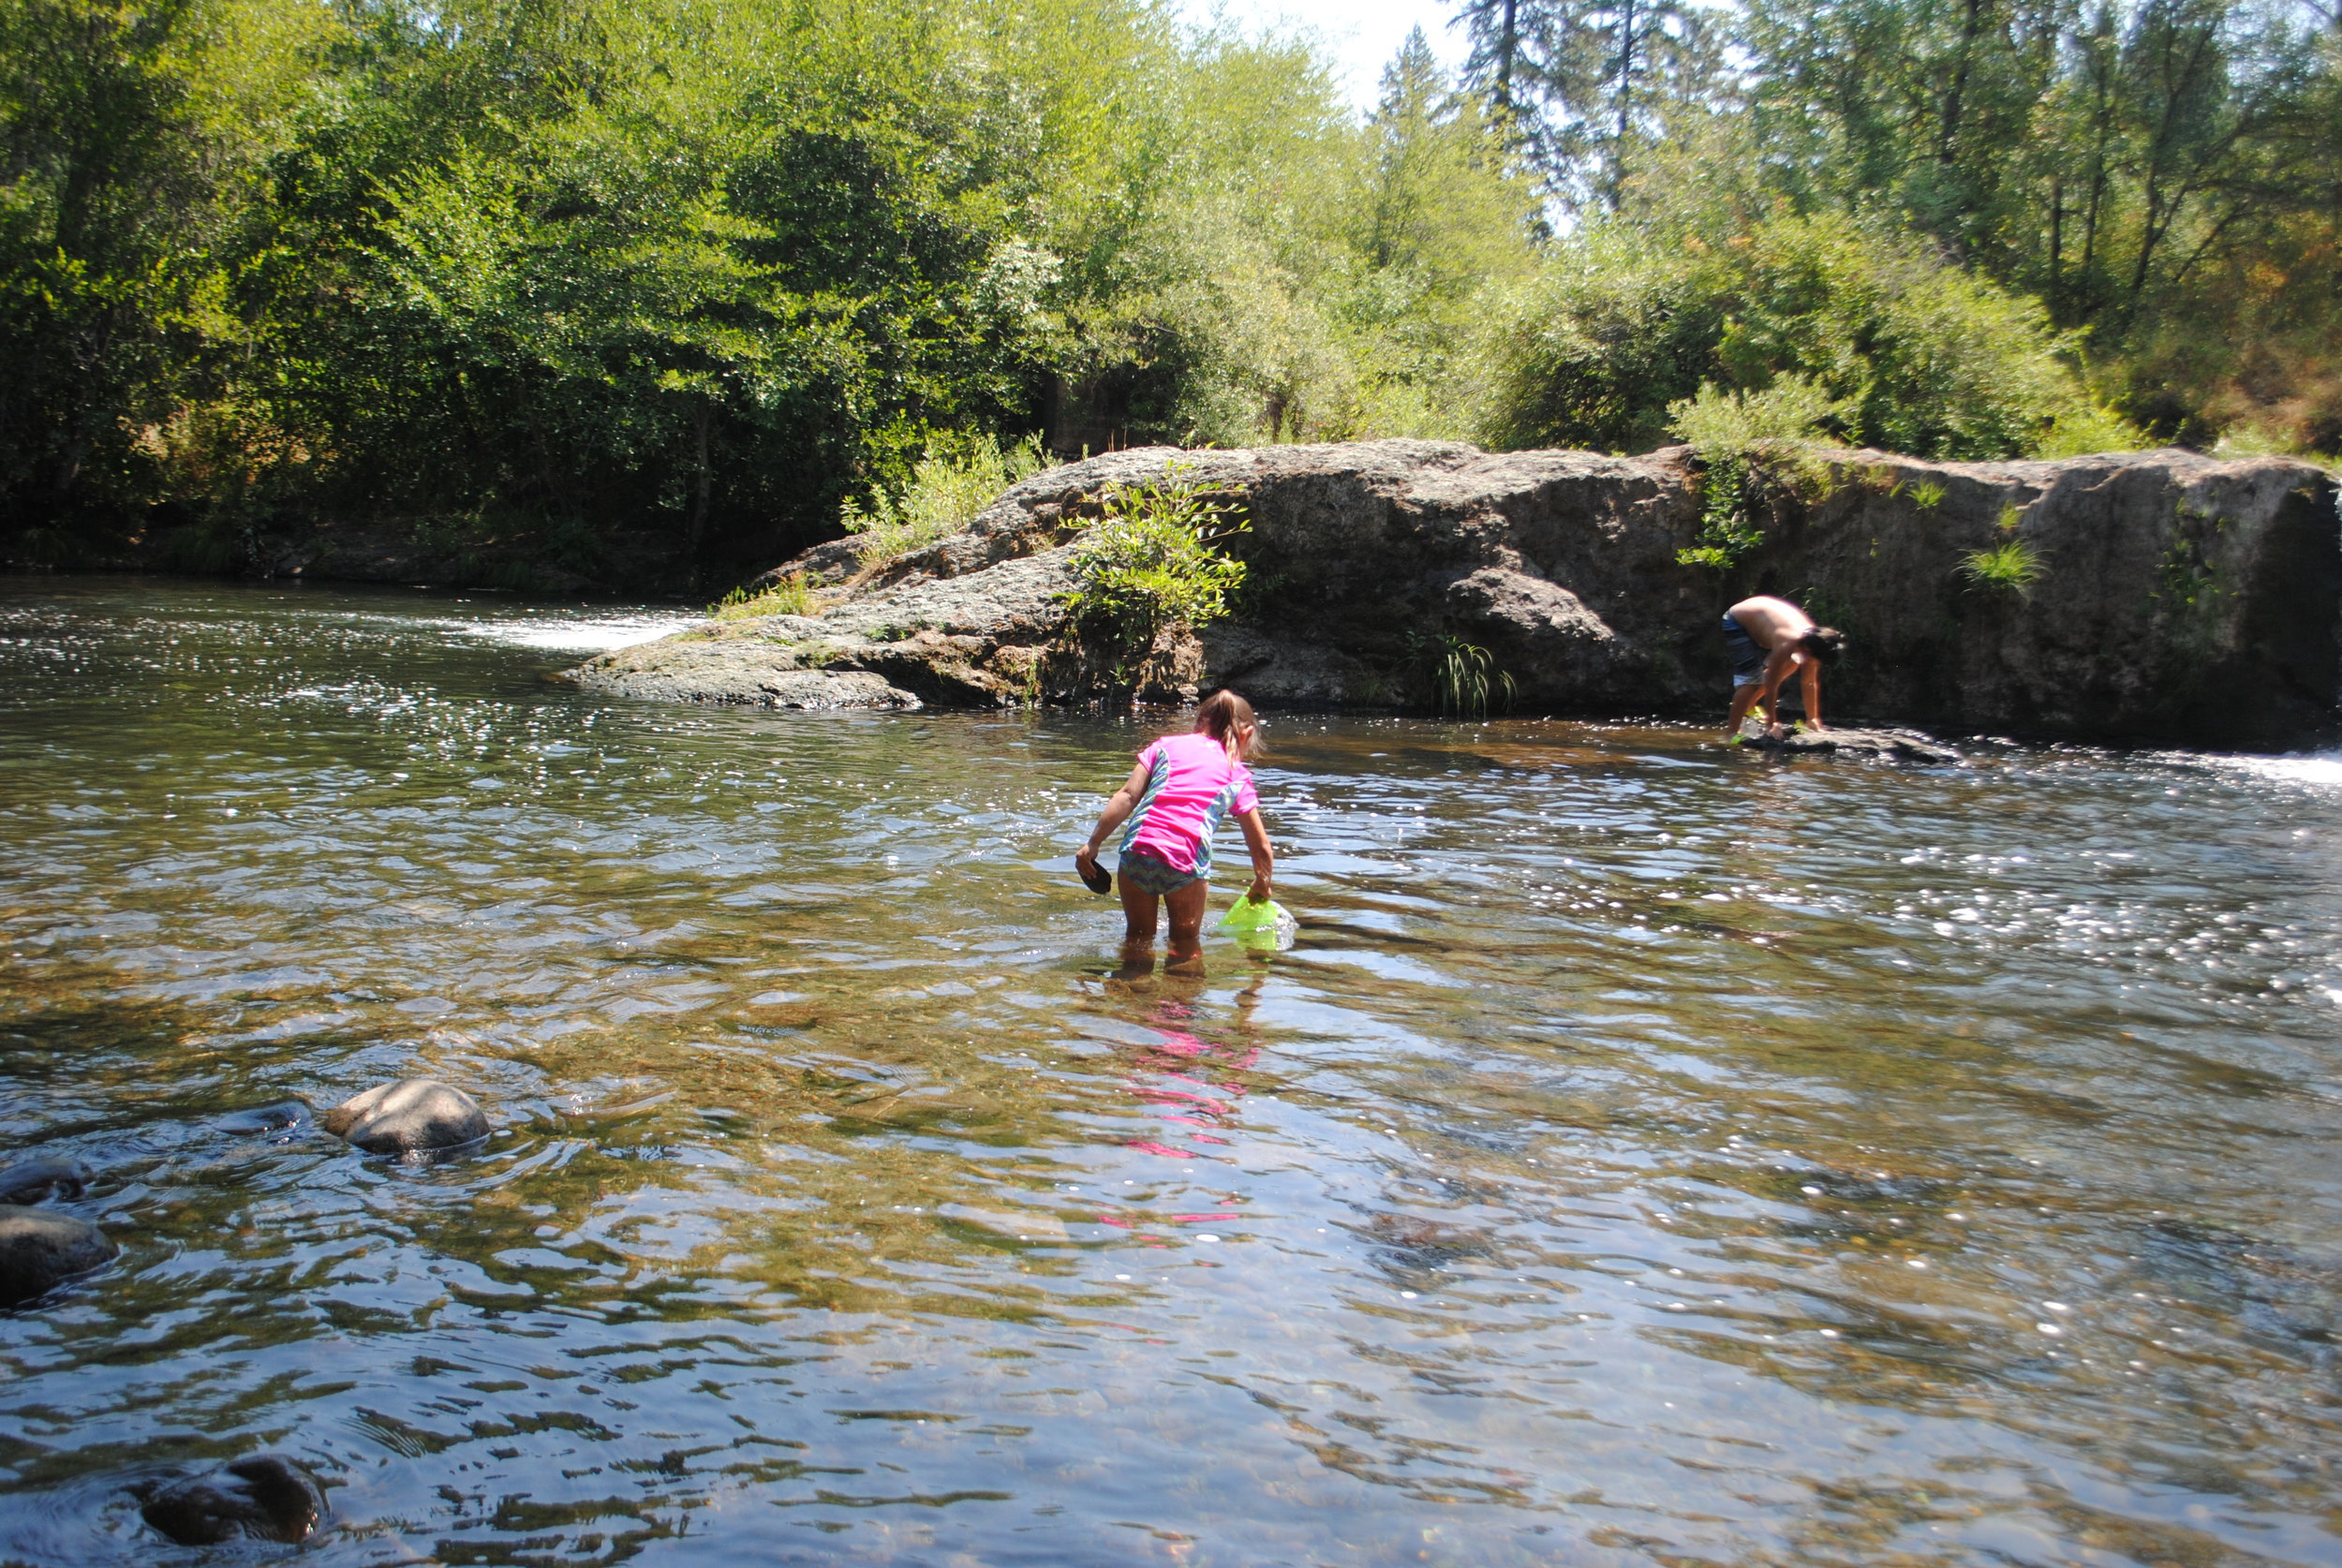 CROWFOOT FALLS - Swimming Holes - What to do in Southern Oregon - Trail, Oregon